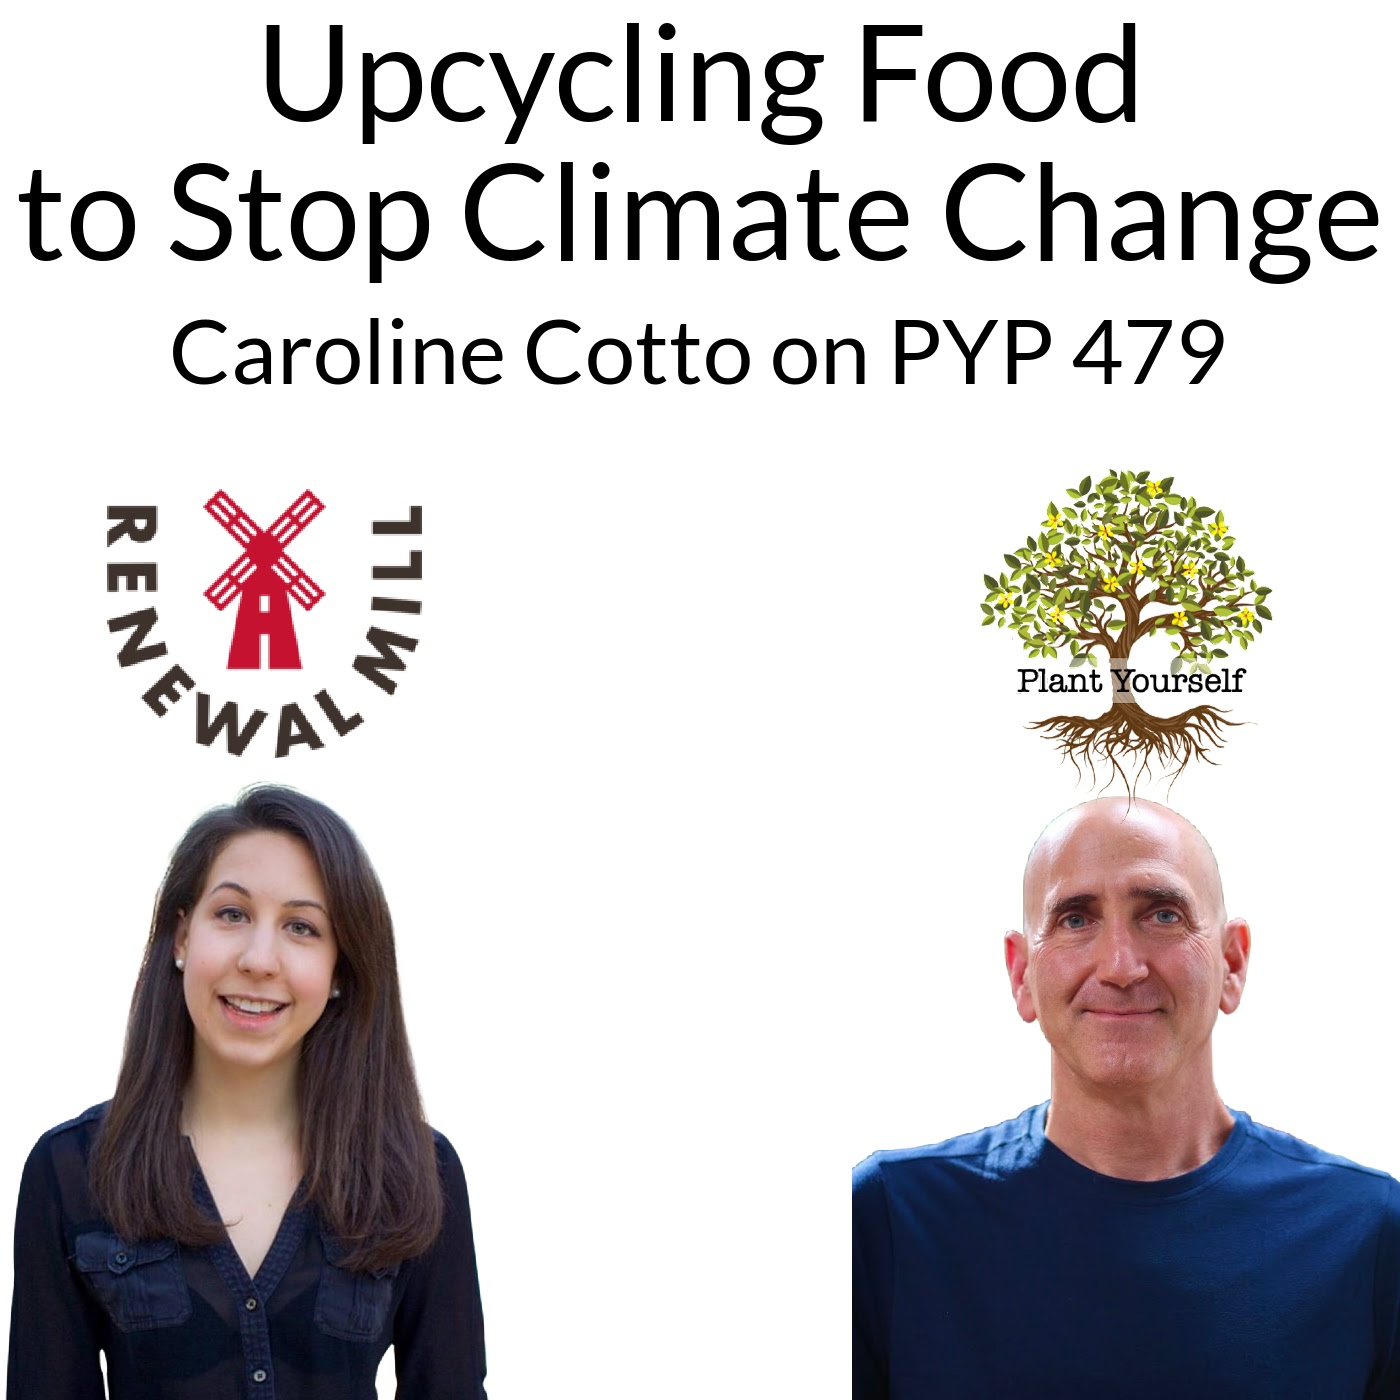 Upcycling Food to Stop Climate Change: Caroline Cotto on PYP 485